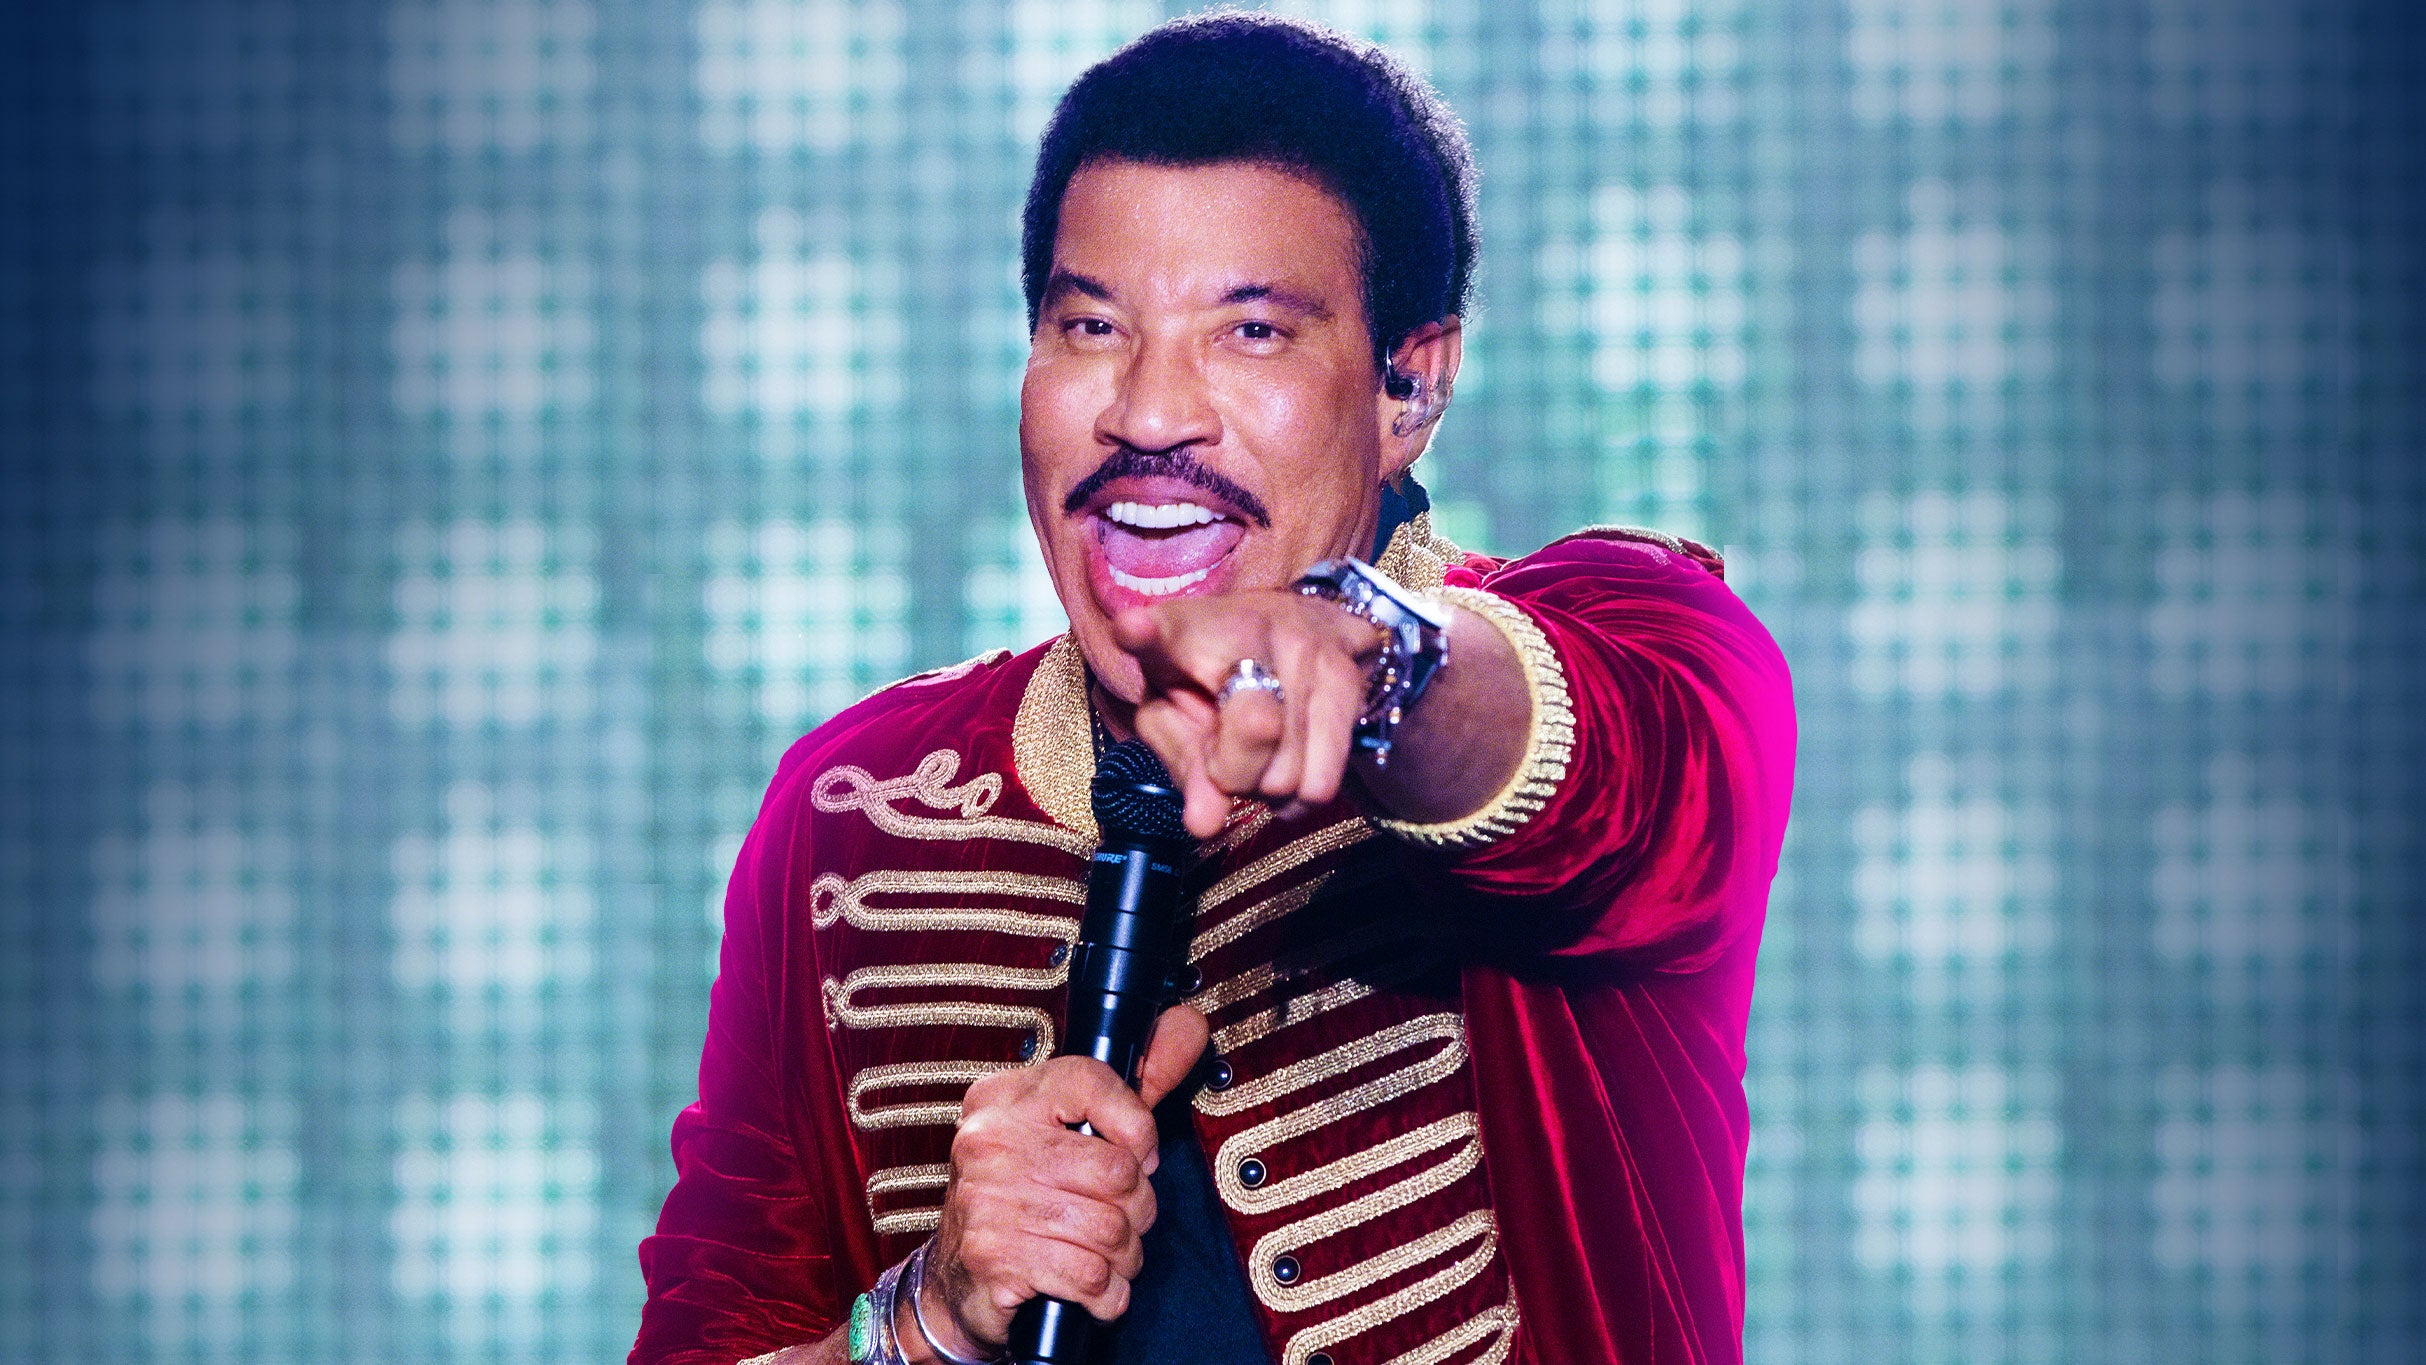 Lionel Richie And Earth, Wind & Fire - Sing A Song All Night Long presale password for advance tickets in Saint Paul